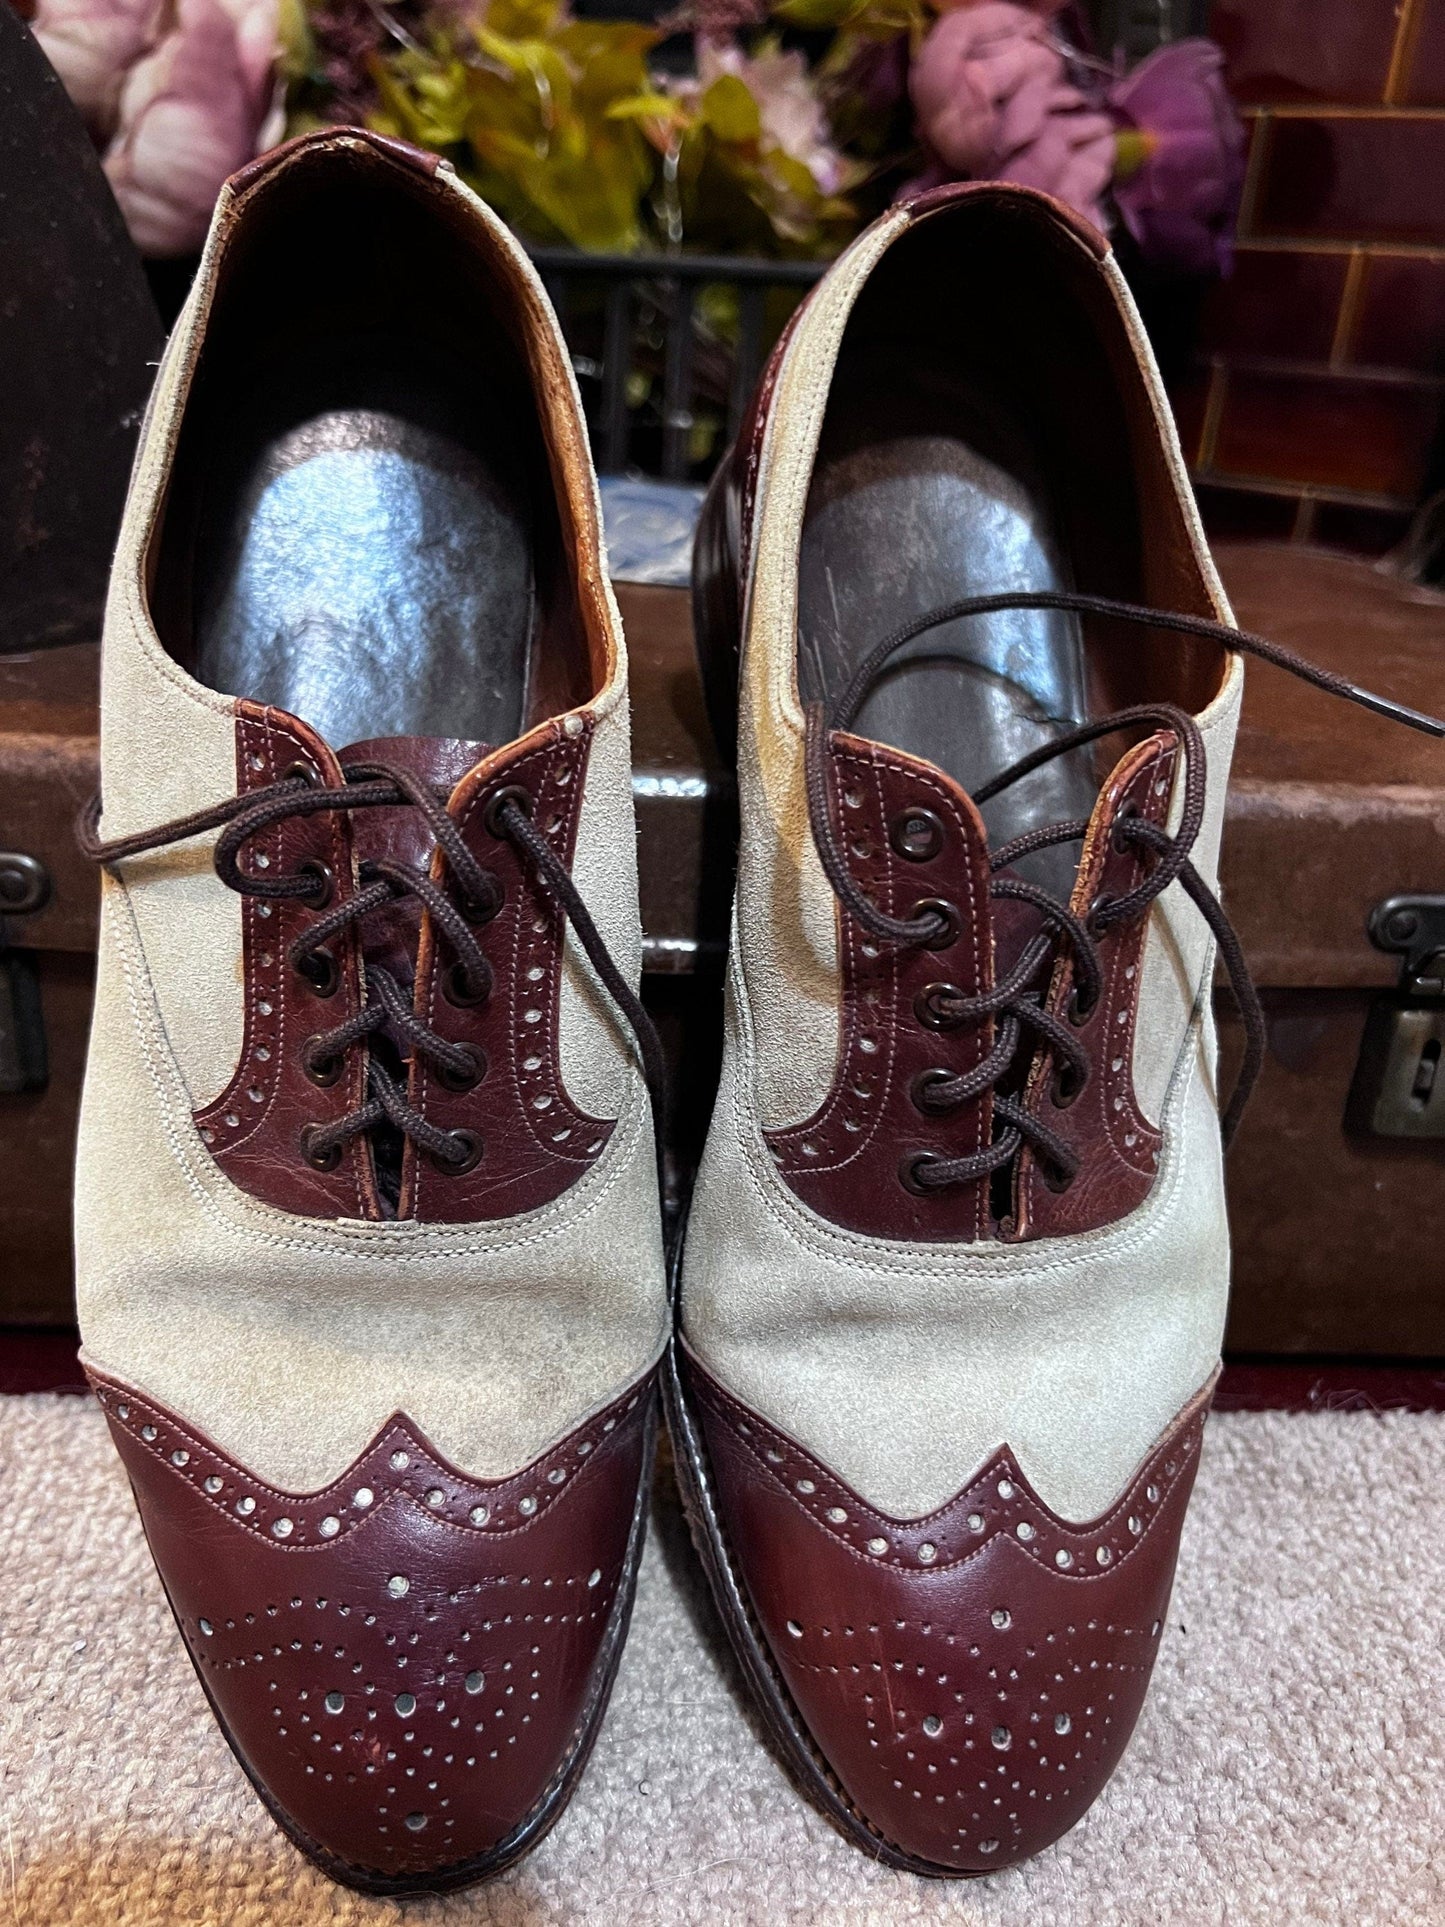 1940s 50s Vintage Shoes two tone Oxford Brown Vintage Lace up shoes Shoes UK 5 - Vintage Lace Ups - Vintage Shoes, 1940s  Leather, Brogues